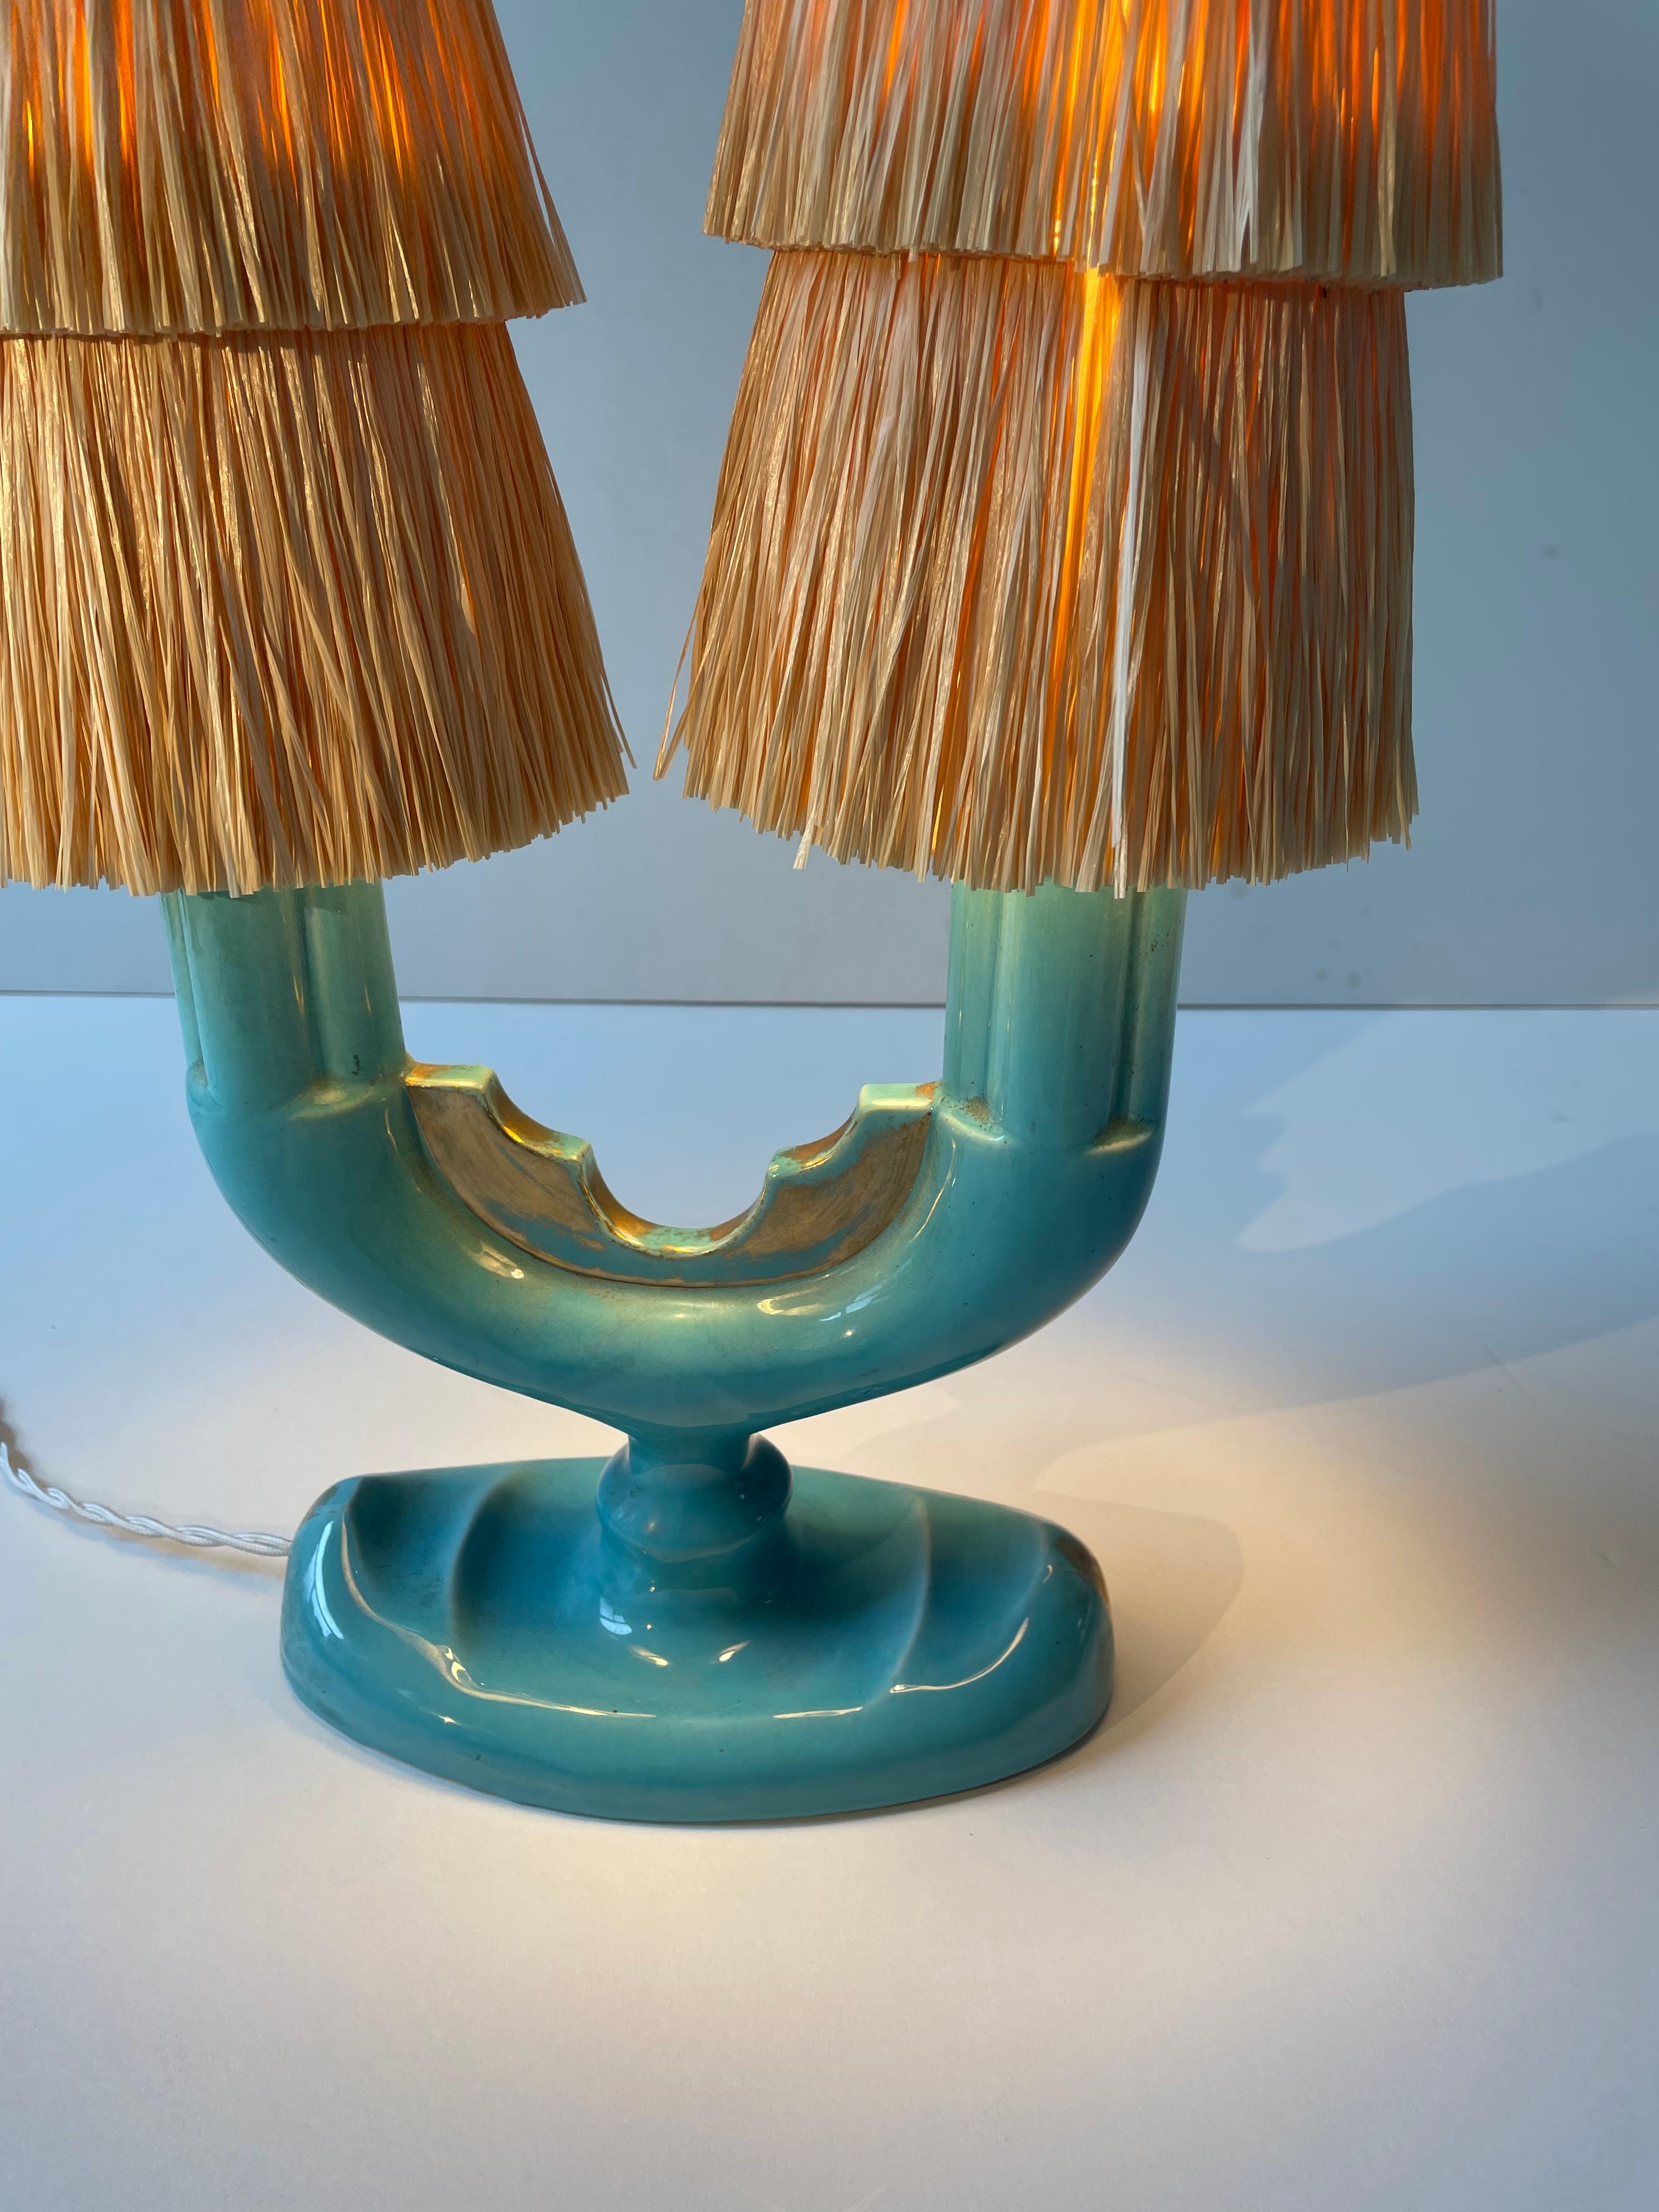 Art Deco Coceram Table Lights  In Turquoise Colour With Raffia Lamp Shades